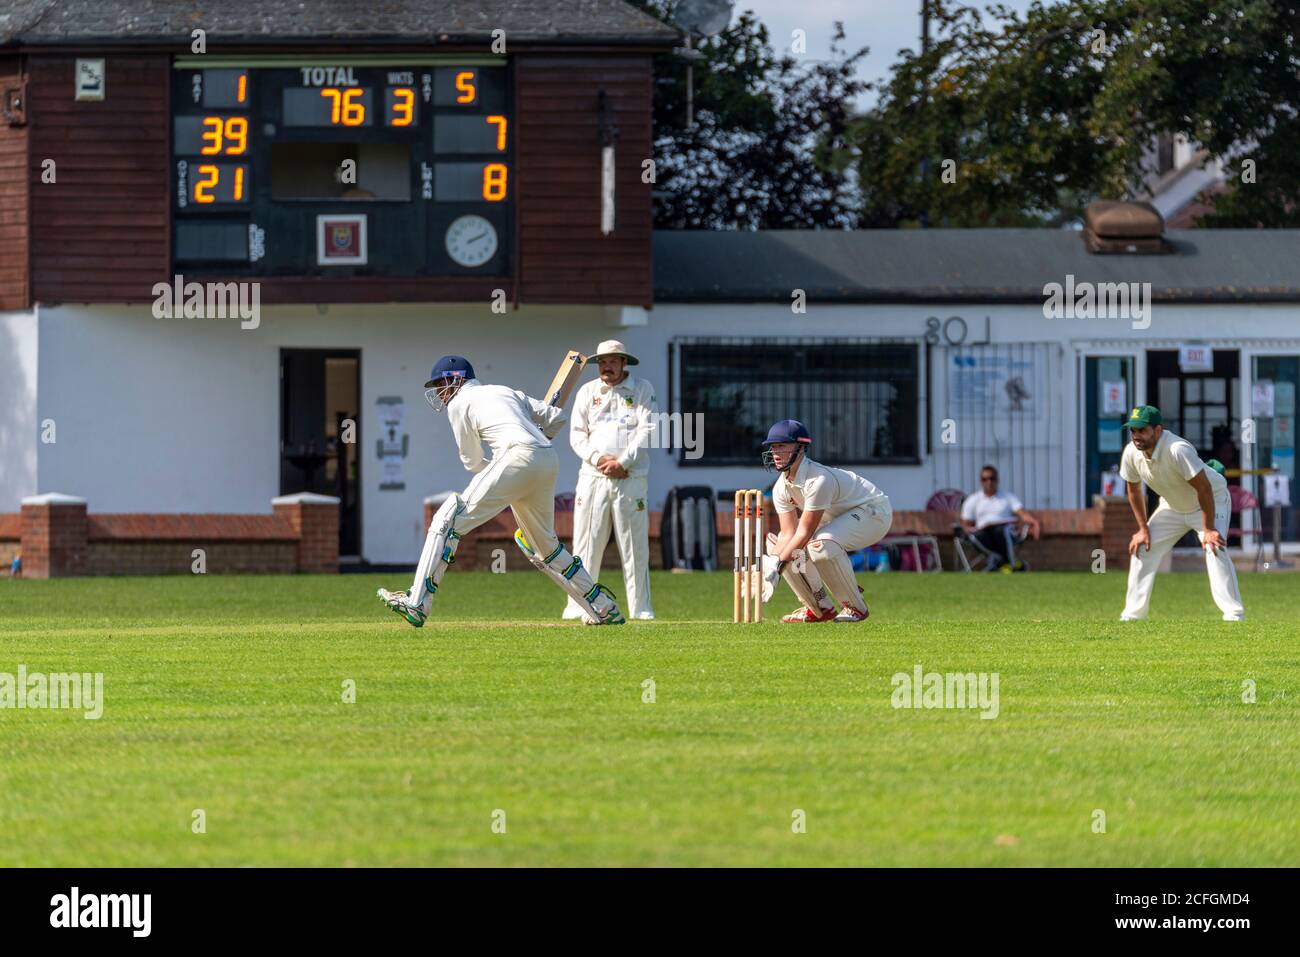 Cricket being played in Chalkwell Park, Westcliff on Sea, Southend, Essex, UK. Leigh on Sea Cricket Club batsman batting Stock Photo